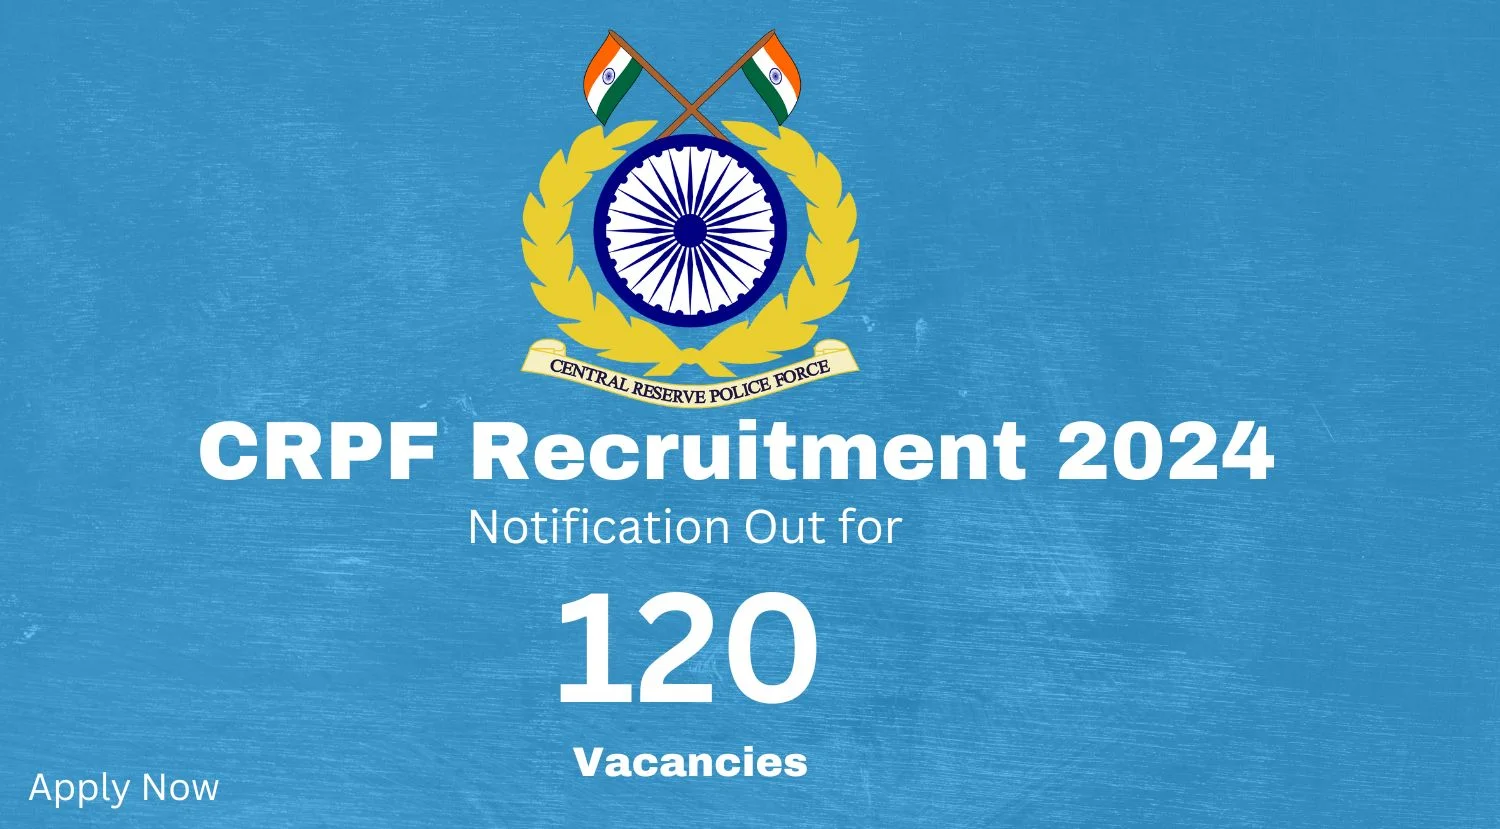 CRPF Recruitment 2024 Notification Out for 120 Vacancies Apply Now